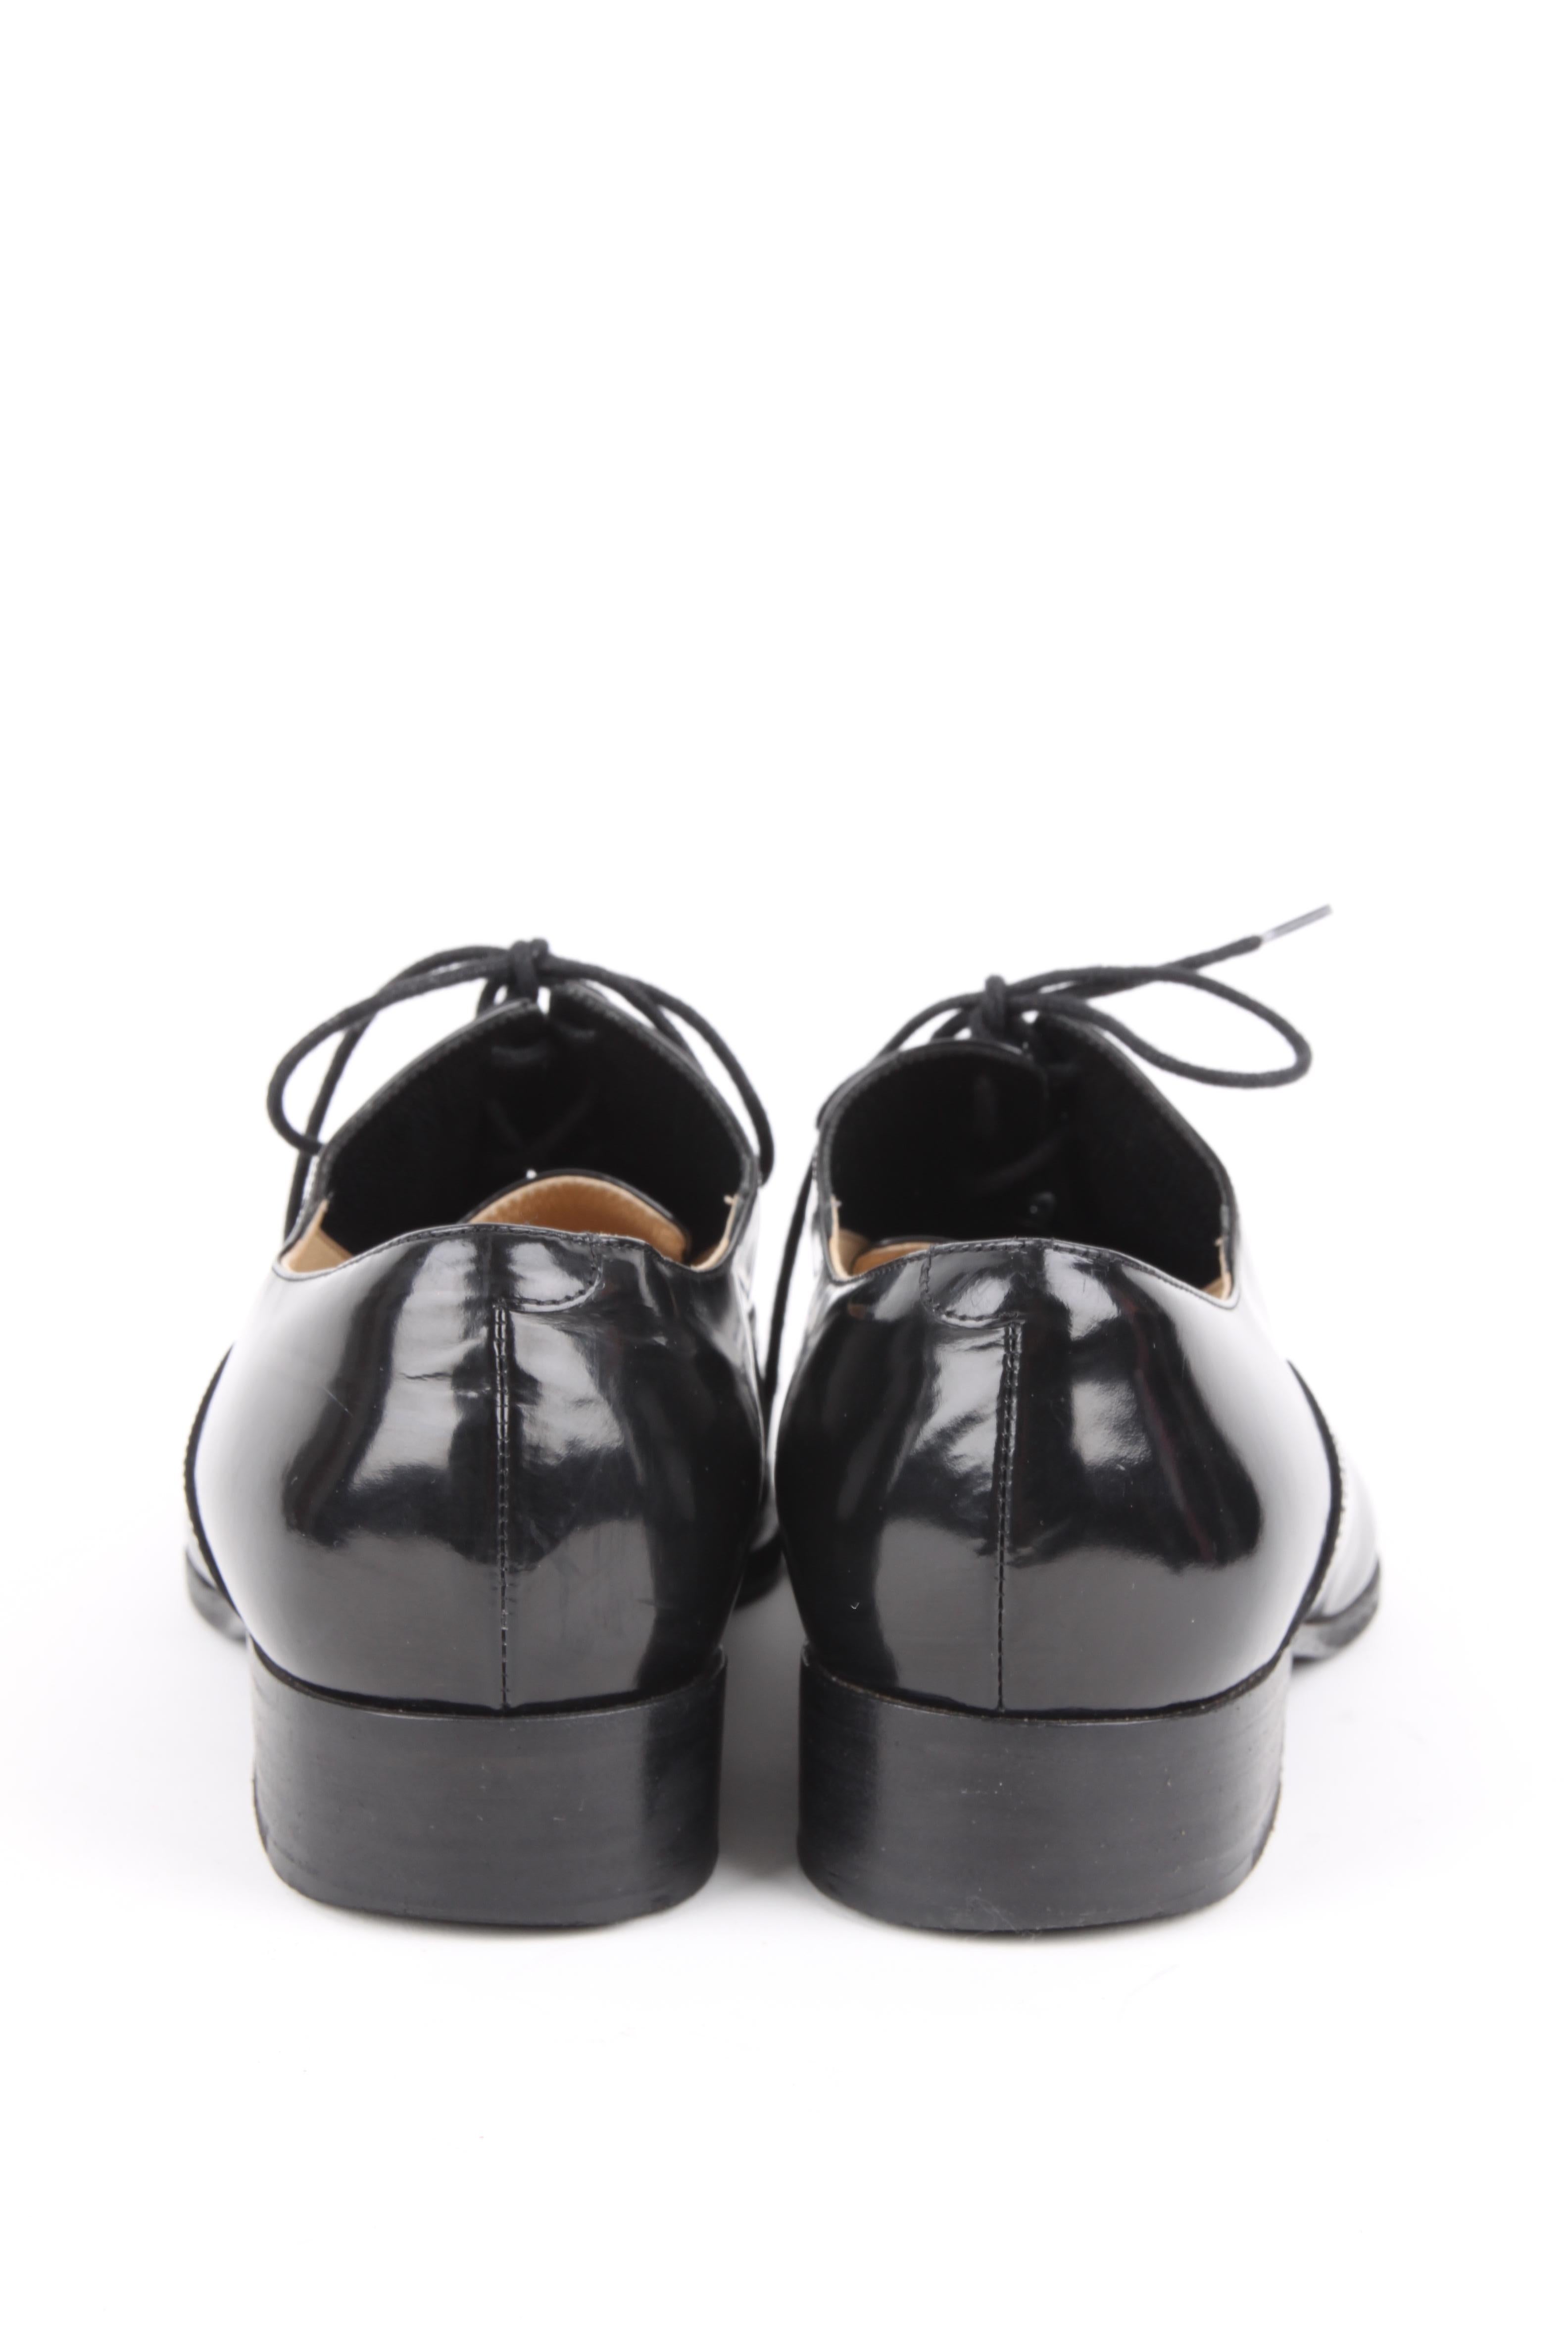 Chanel black patent leather CC logo pointed-toe loafers In Excellent Condition For Sale In Baarn, NL